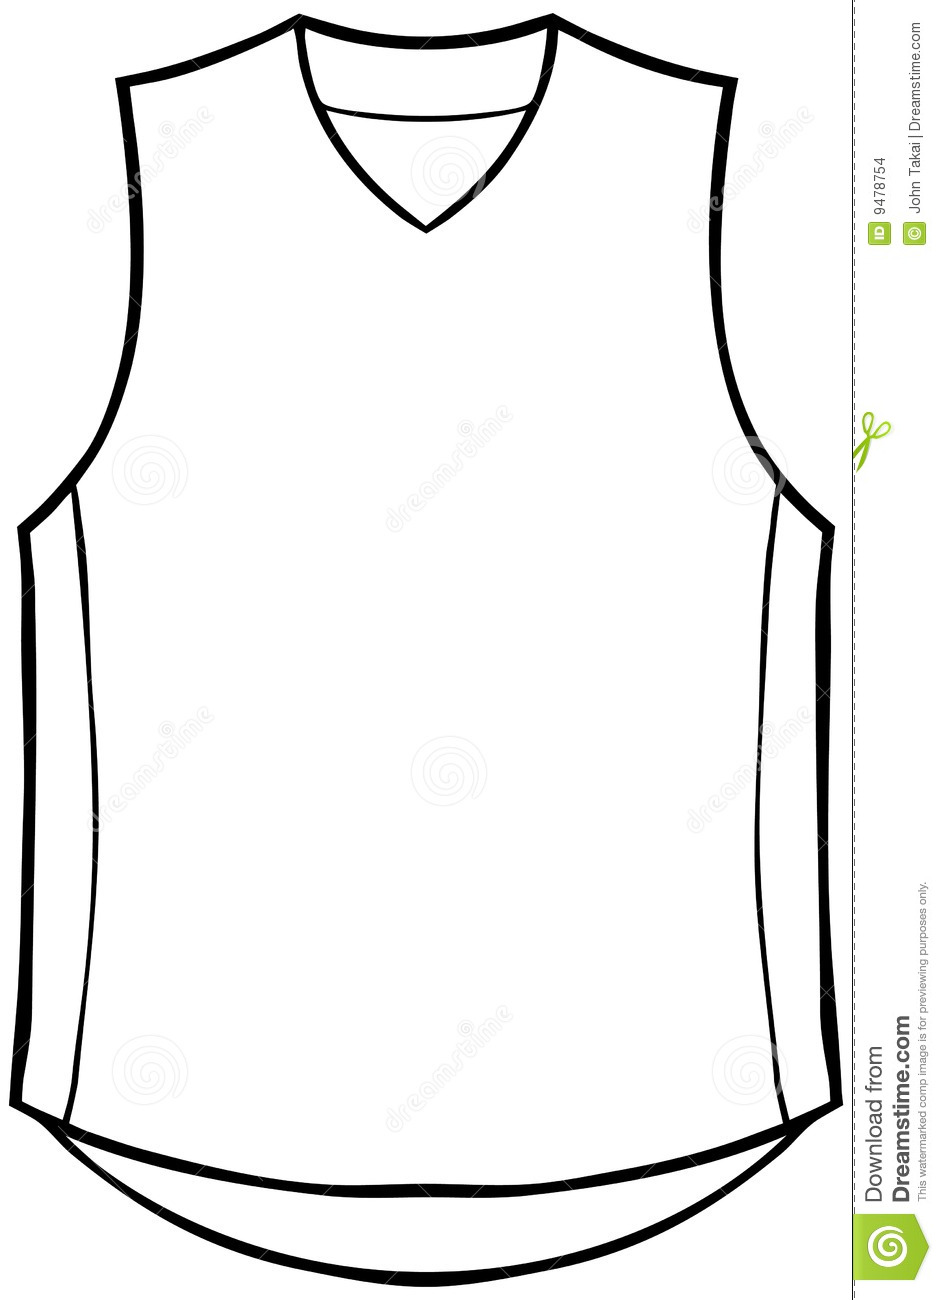 Basketball jersey clipart 1 » Clipart Station.